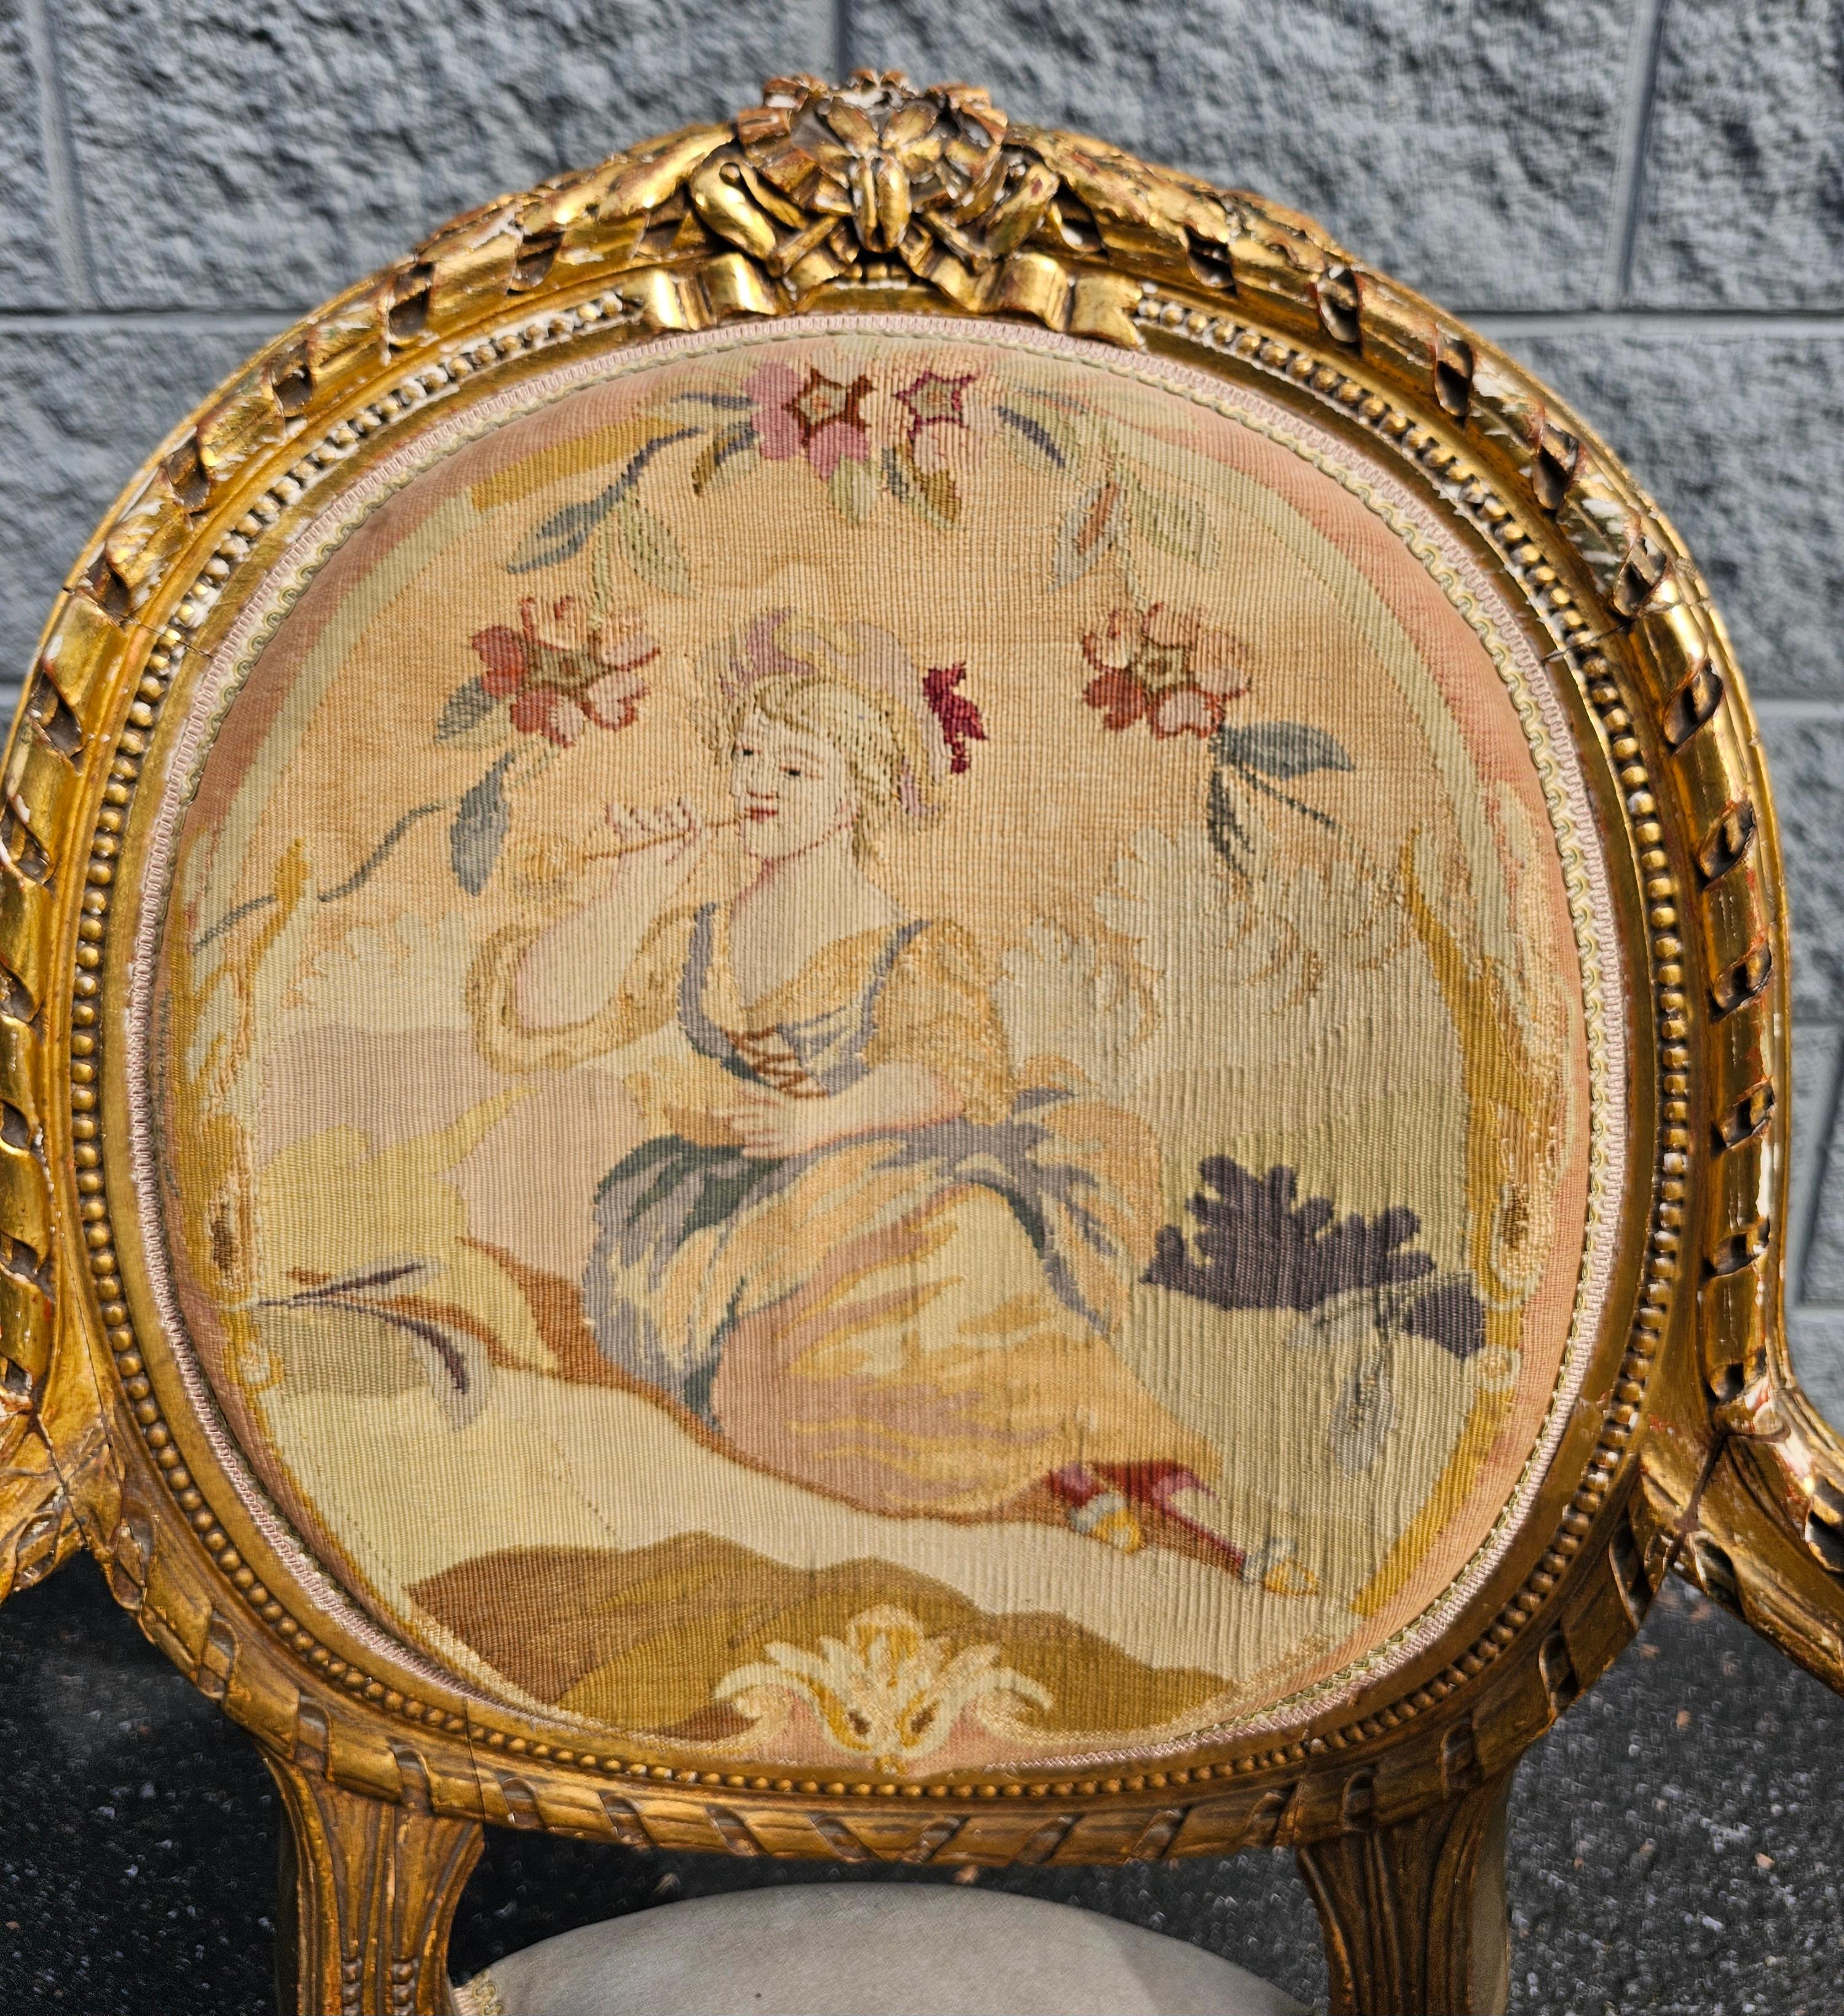 Louis XVI Style Gilt, Suede Leather and Needlepoint Upholstered Fauteuil In Good Condition For Sale In Germantown, MD